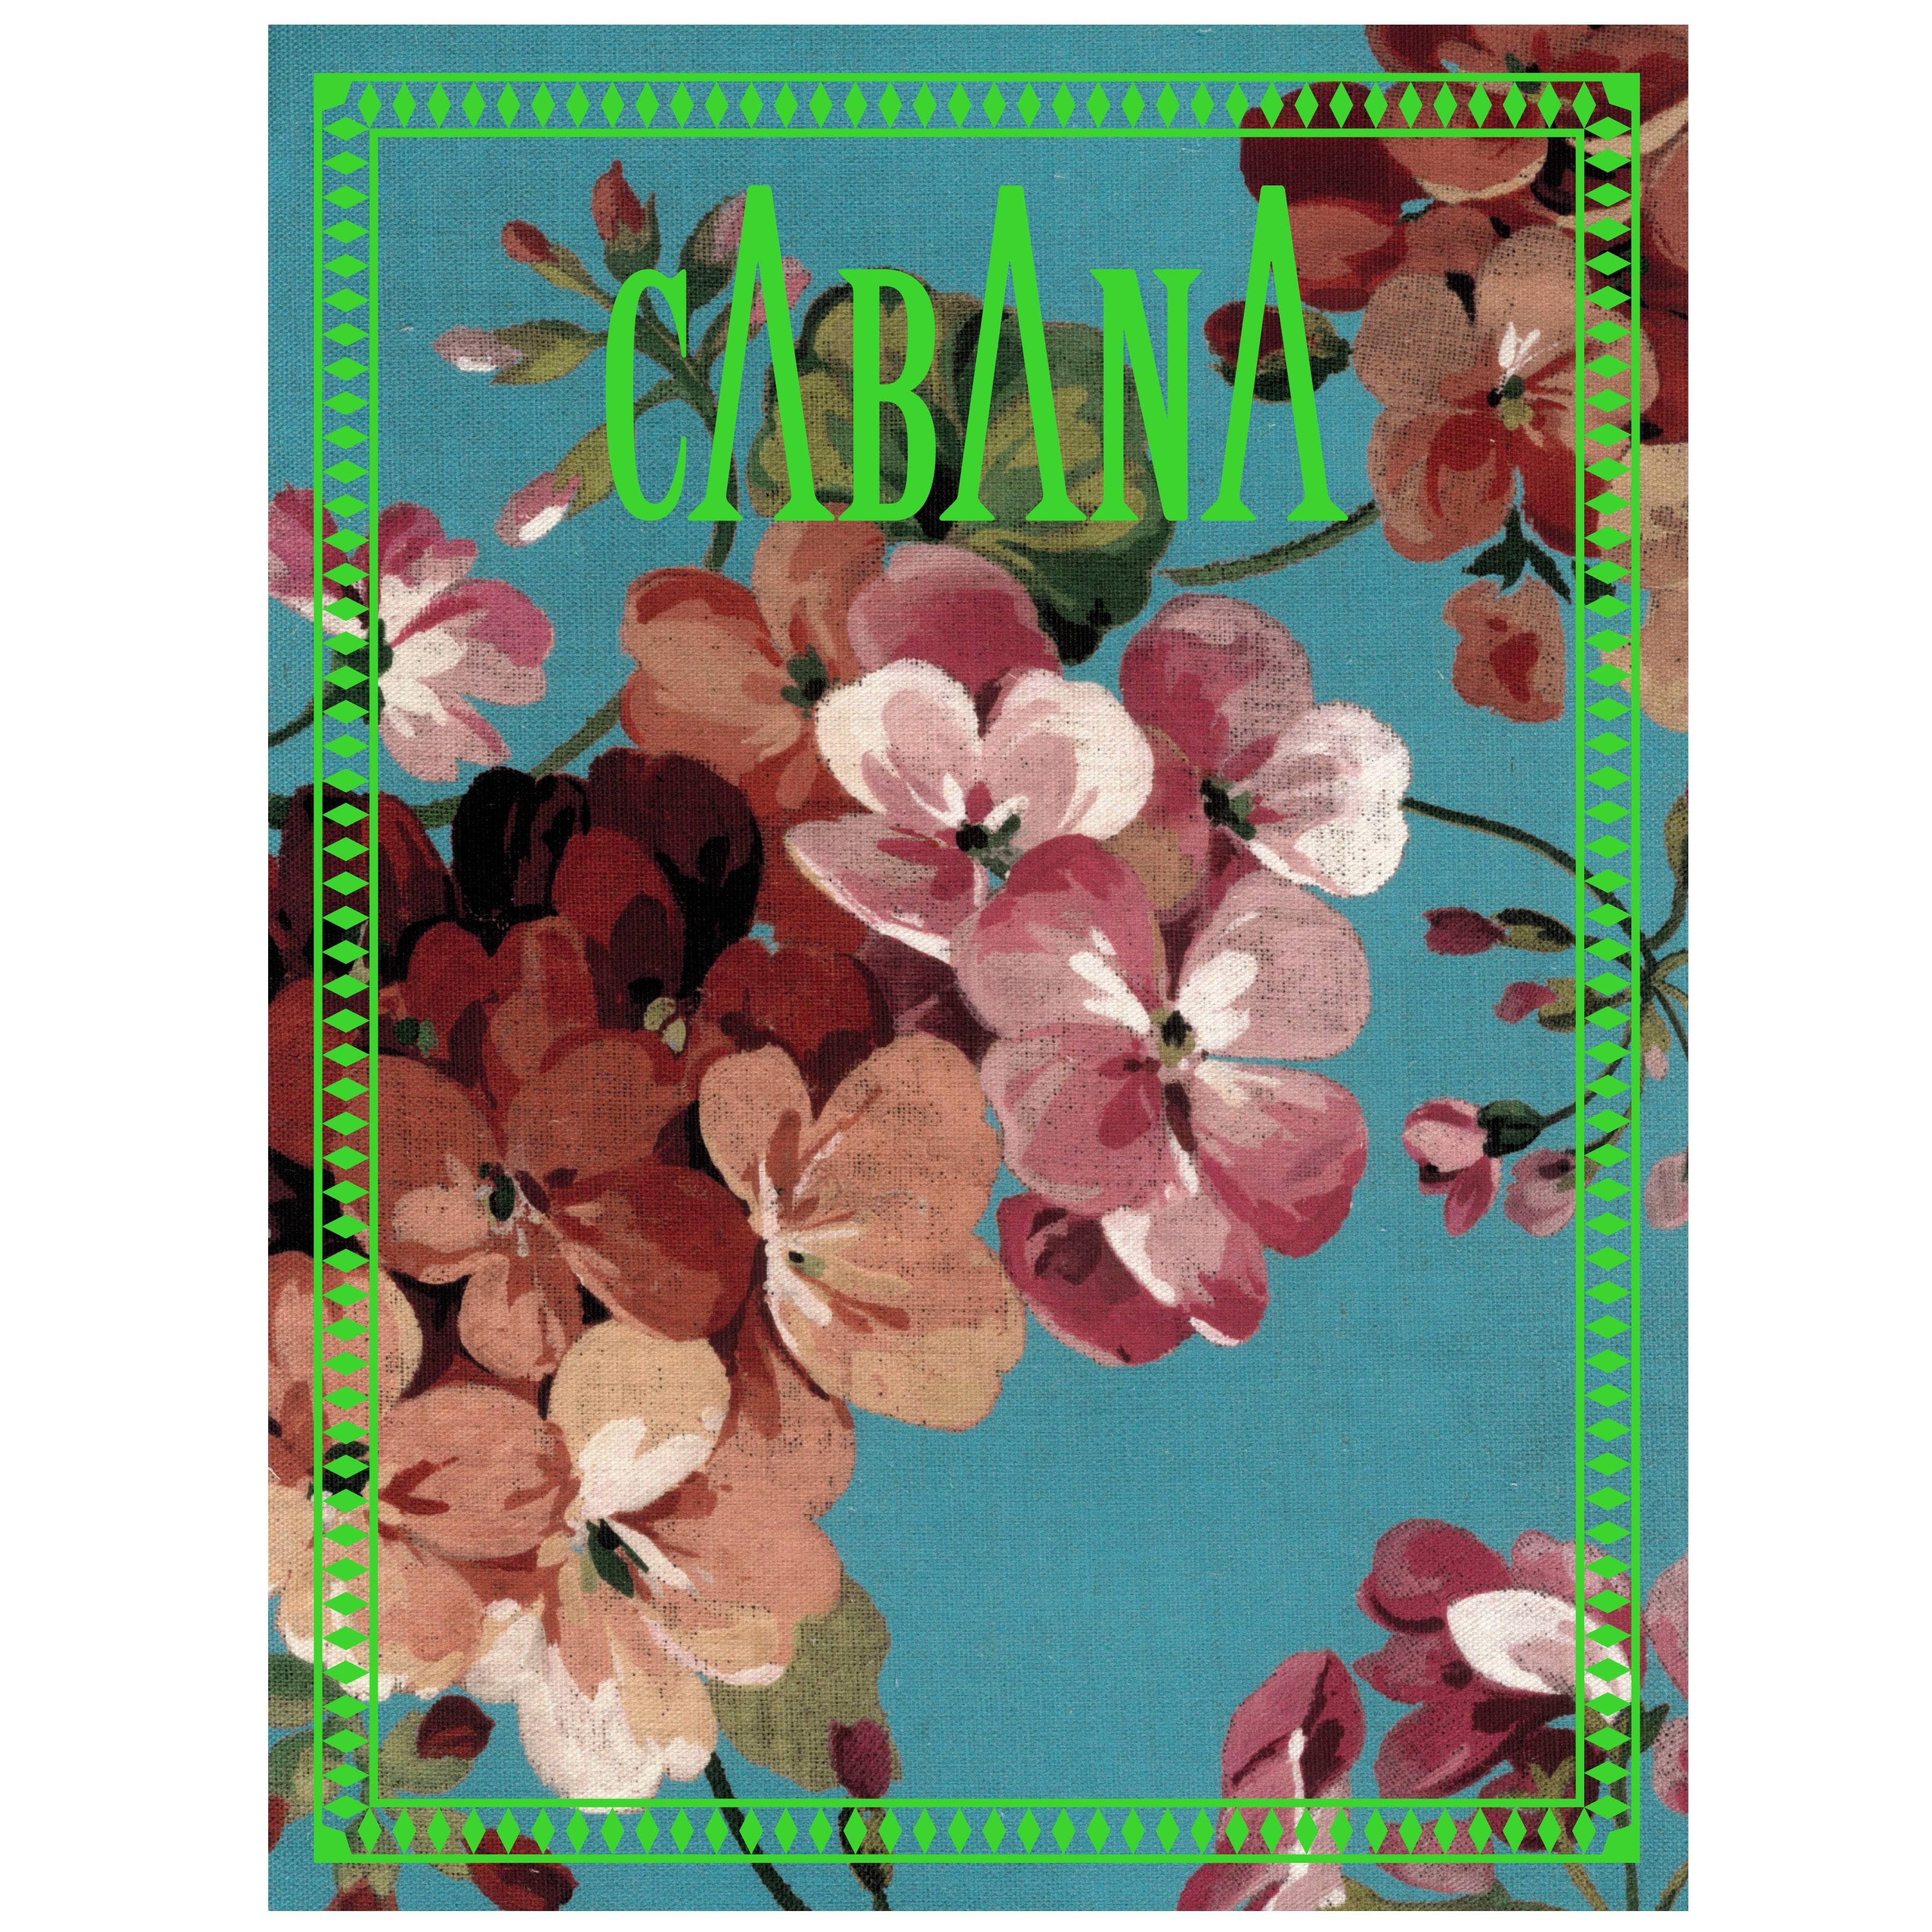 Cabana Magazine Issue 5, Cover by Gucci For Sale